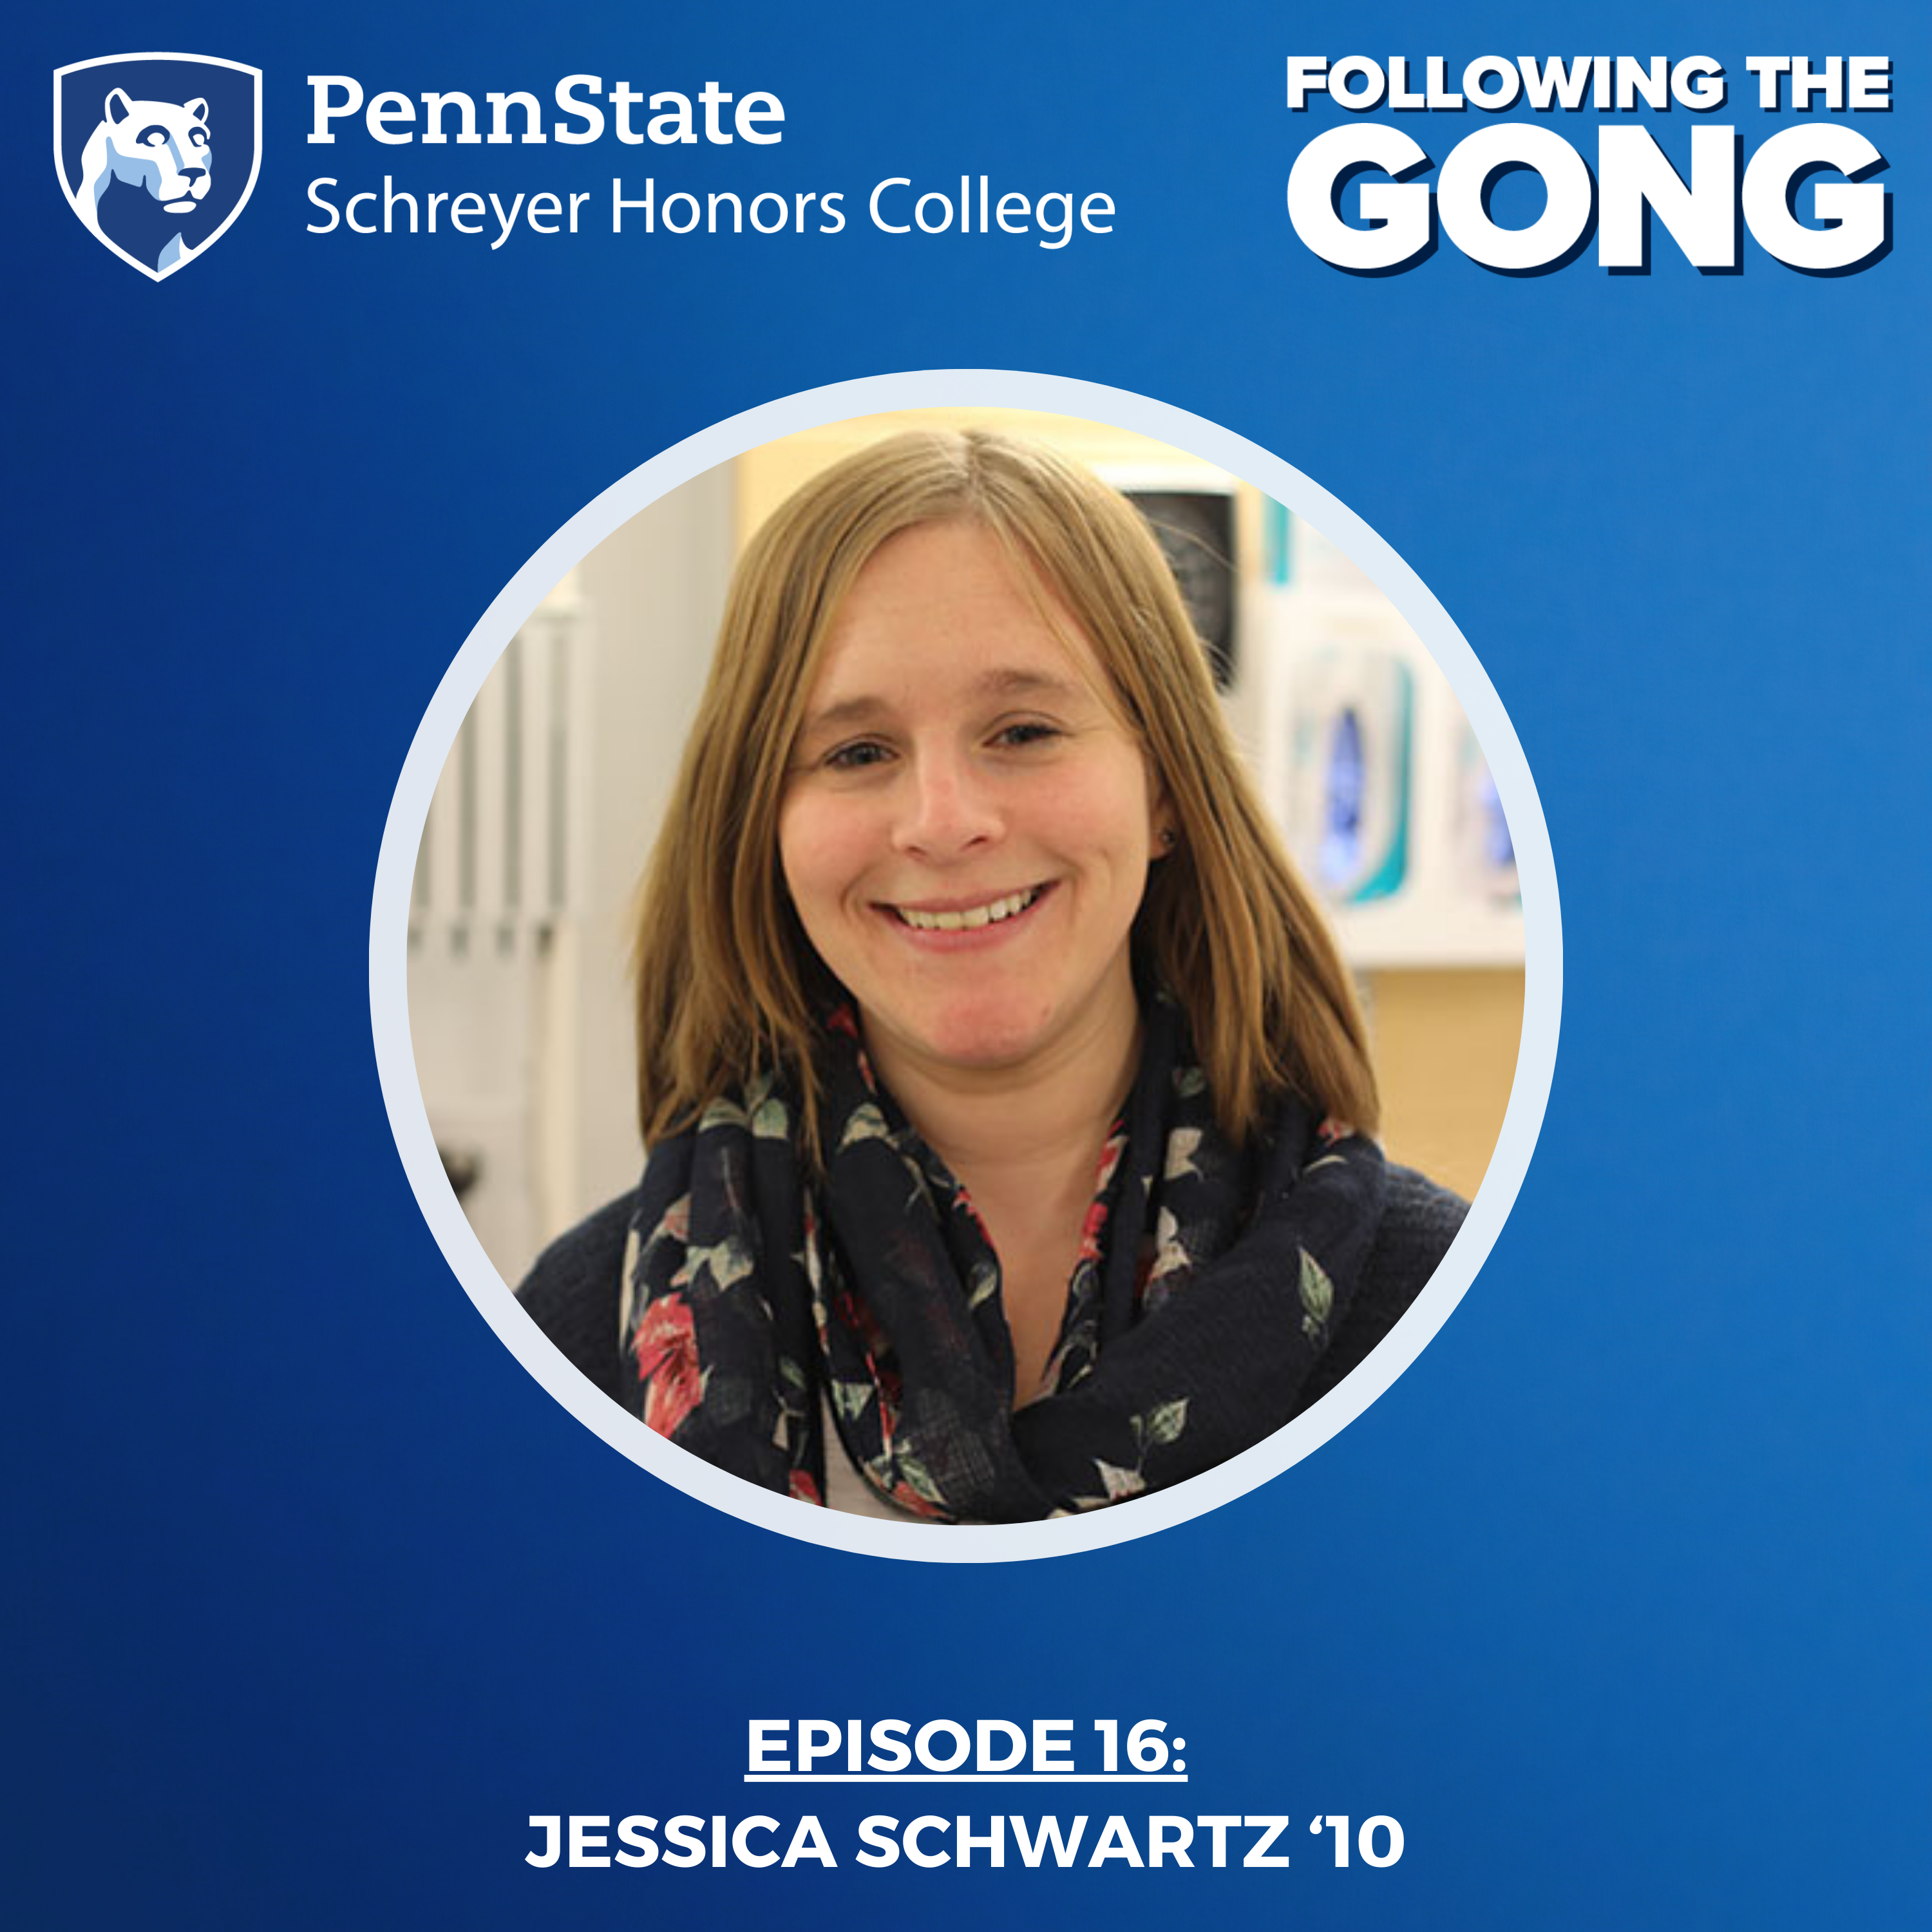 FTG 0016 - All Things Physician Assistant with PA Jessica Schwartz '10